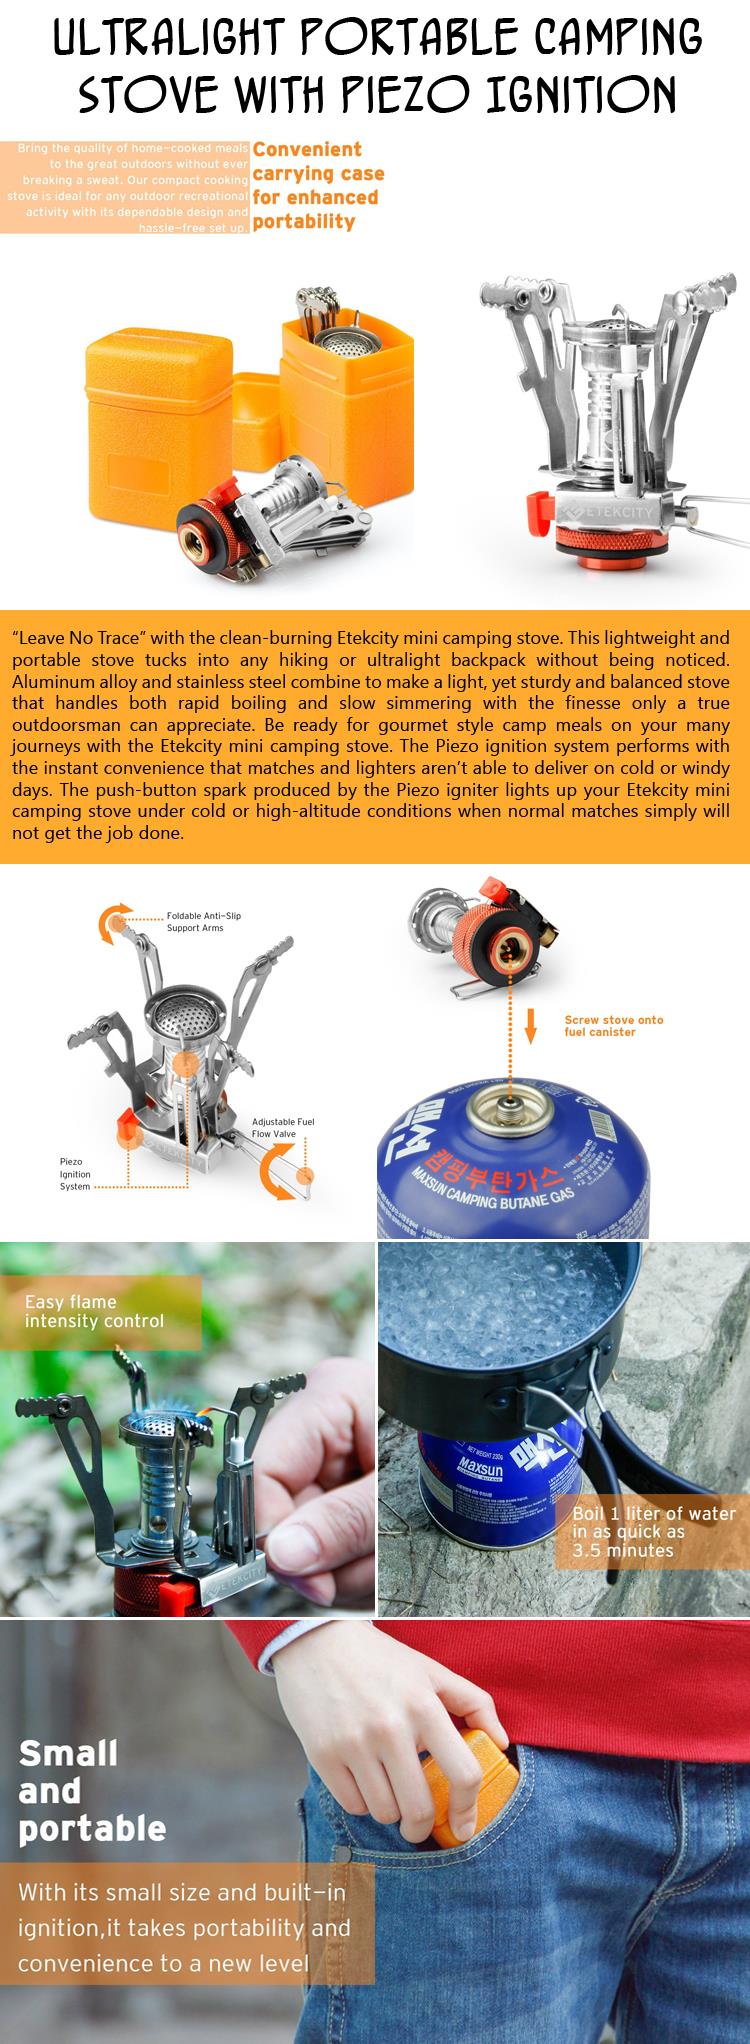 Ultralight Portable Camping Stove with Piezo Ignition